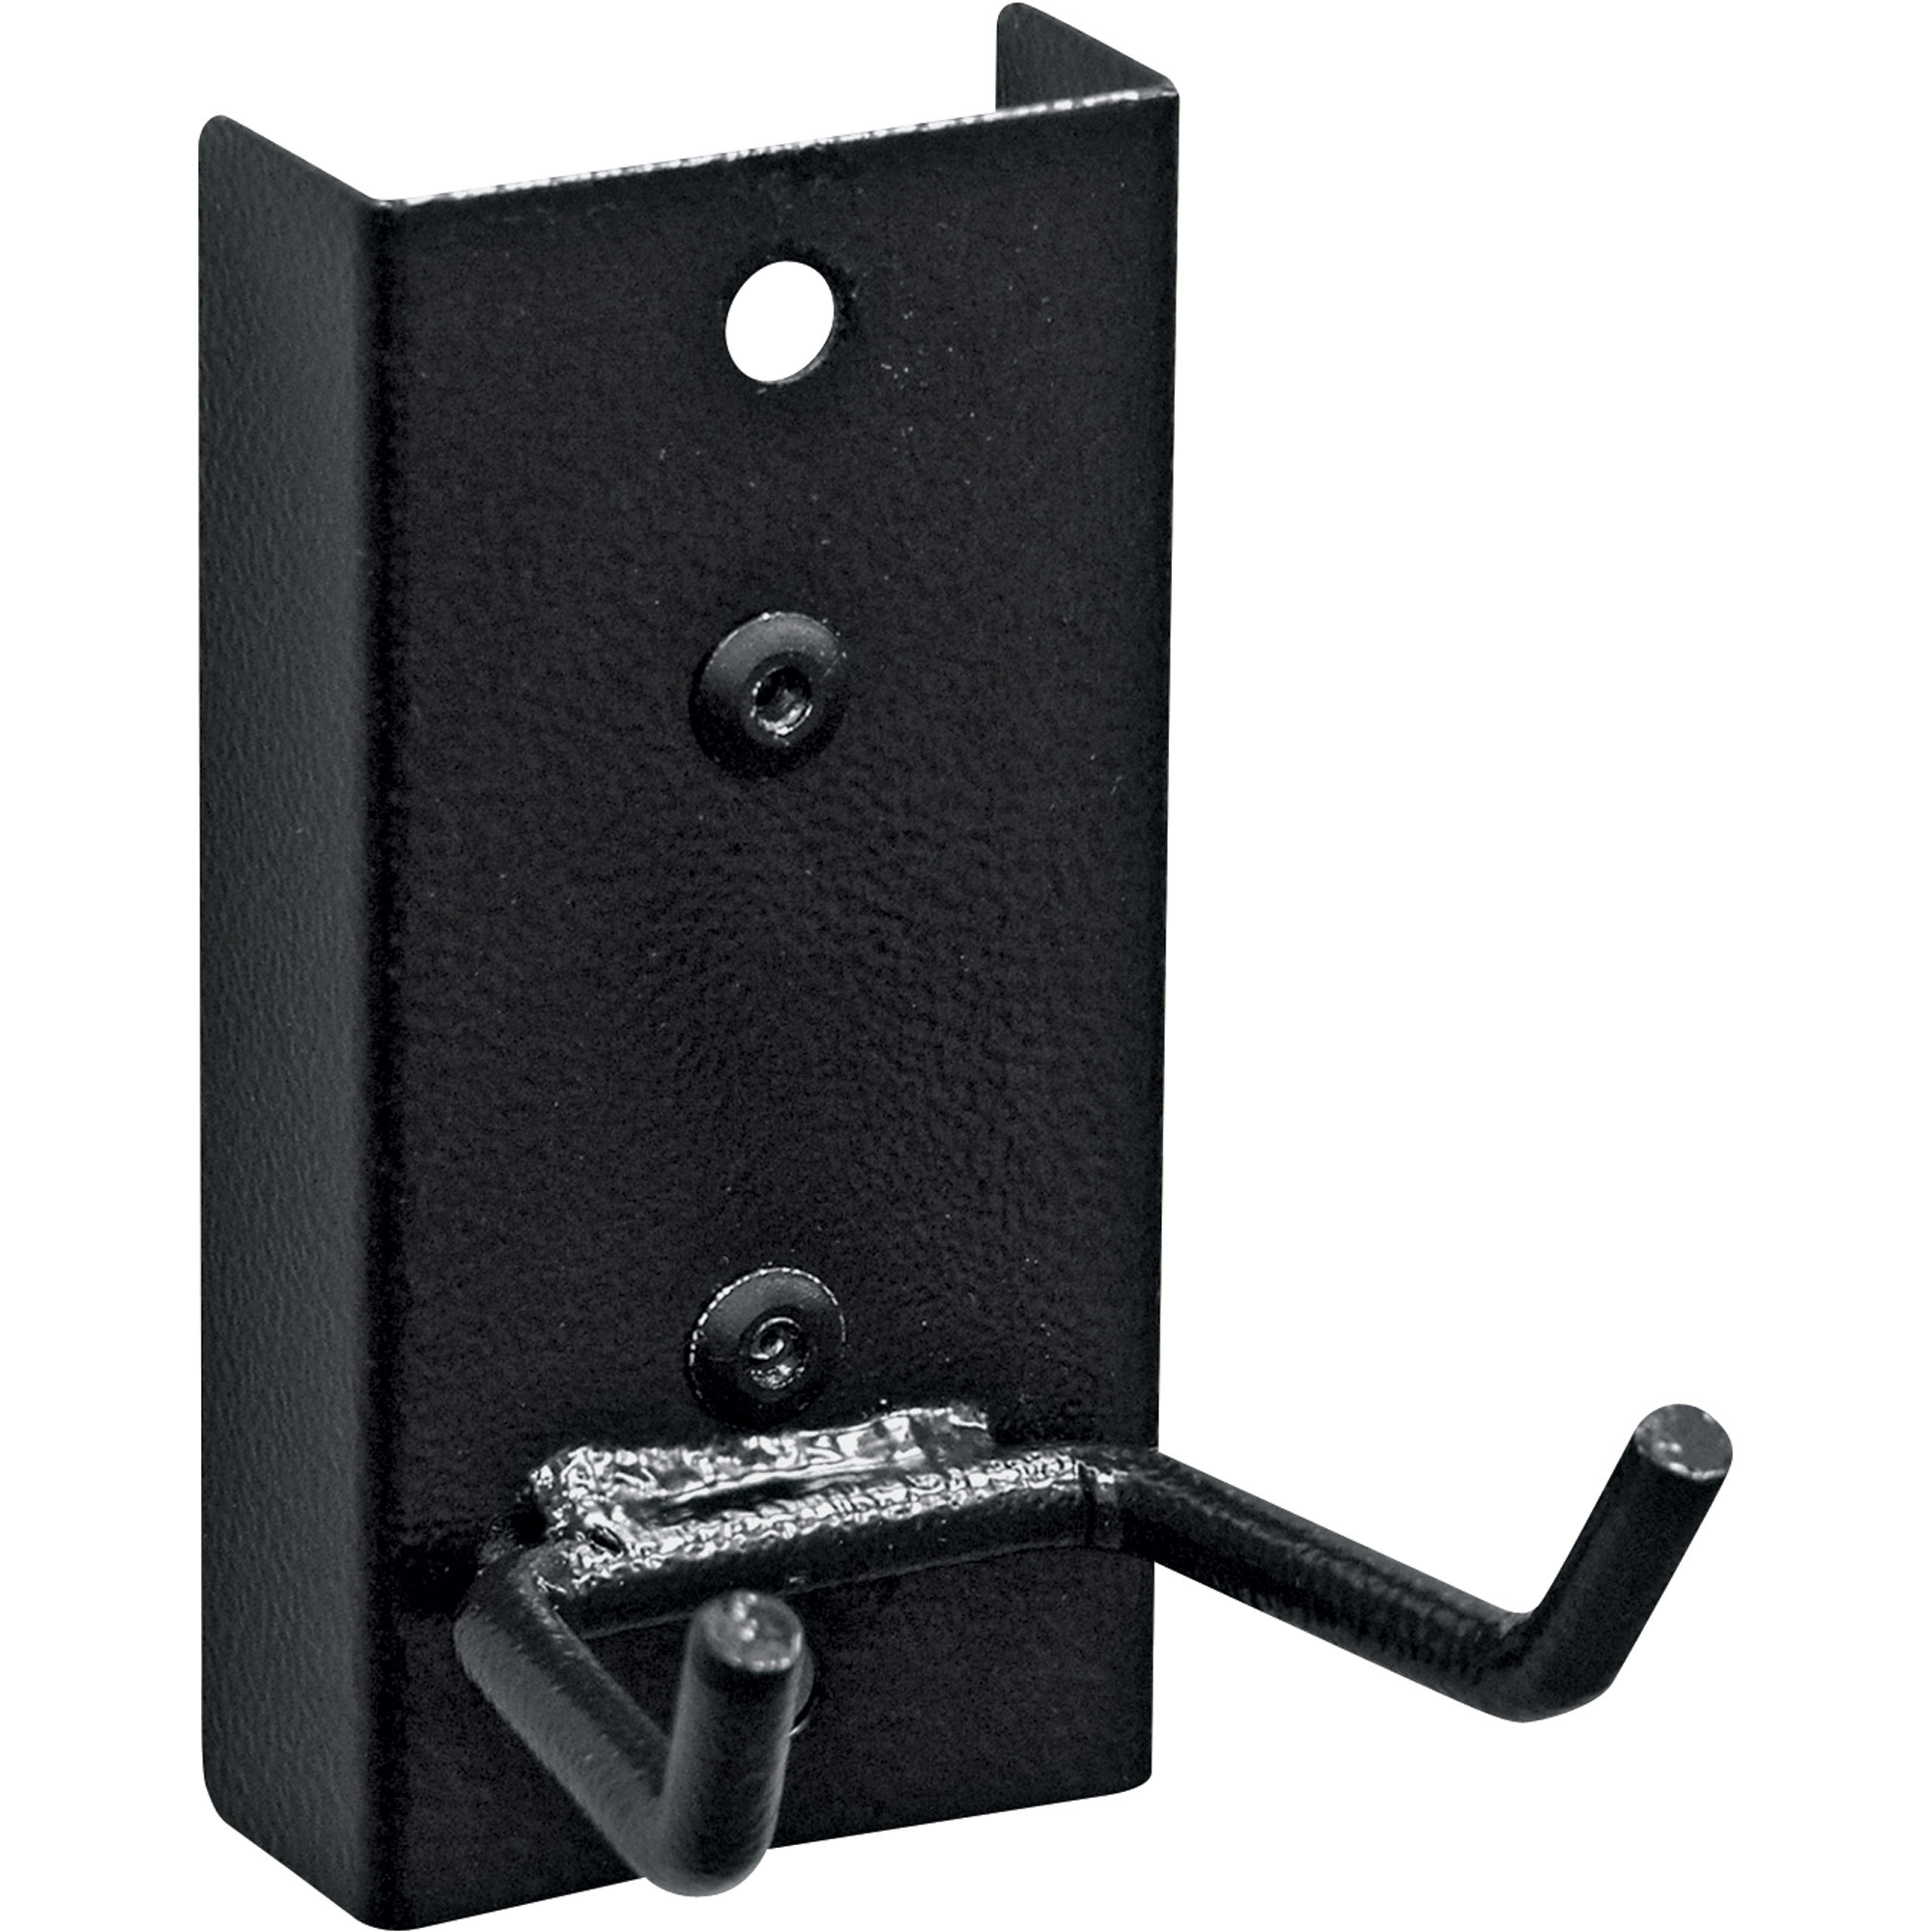 Triton Products Heavy-Duty Magnetic Tool Hanger, Model 72450